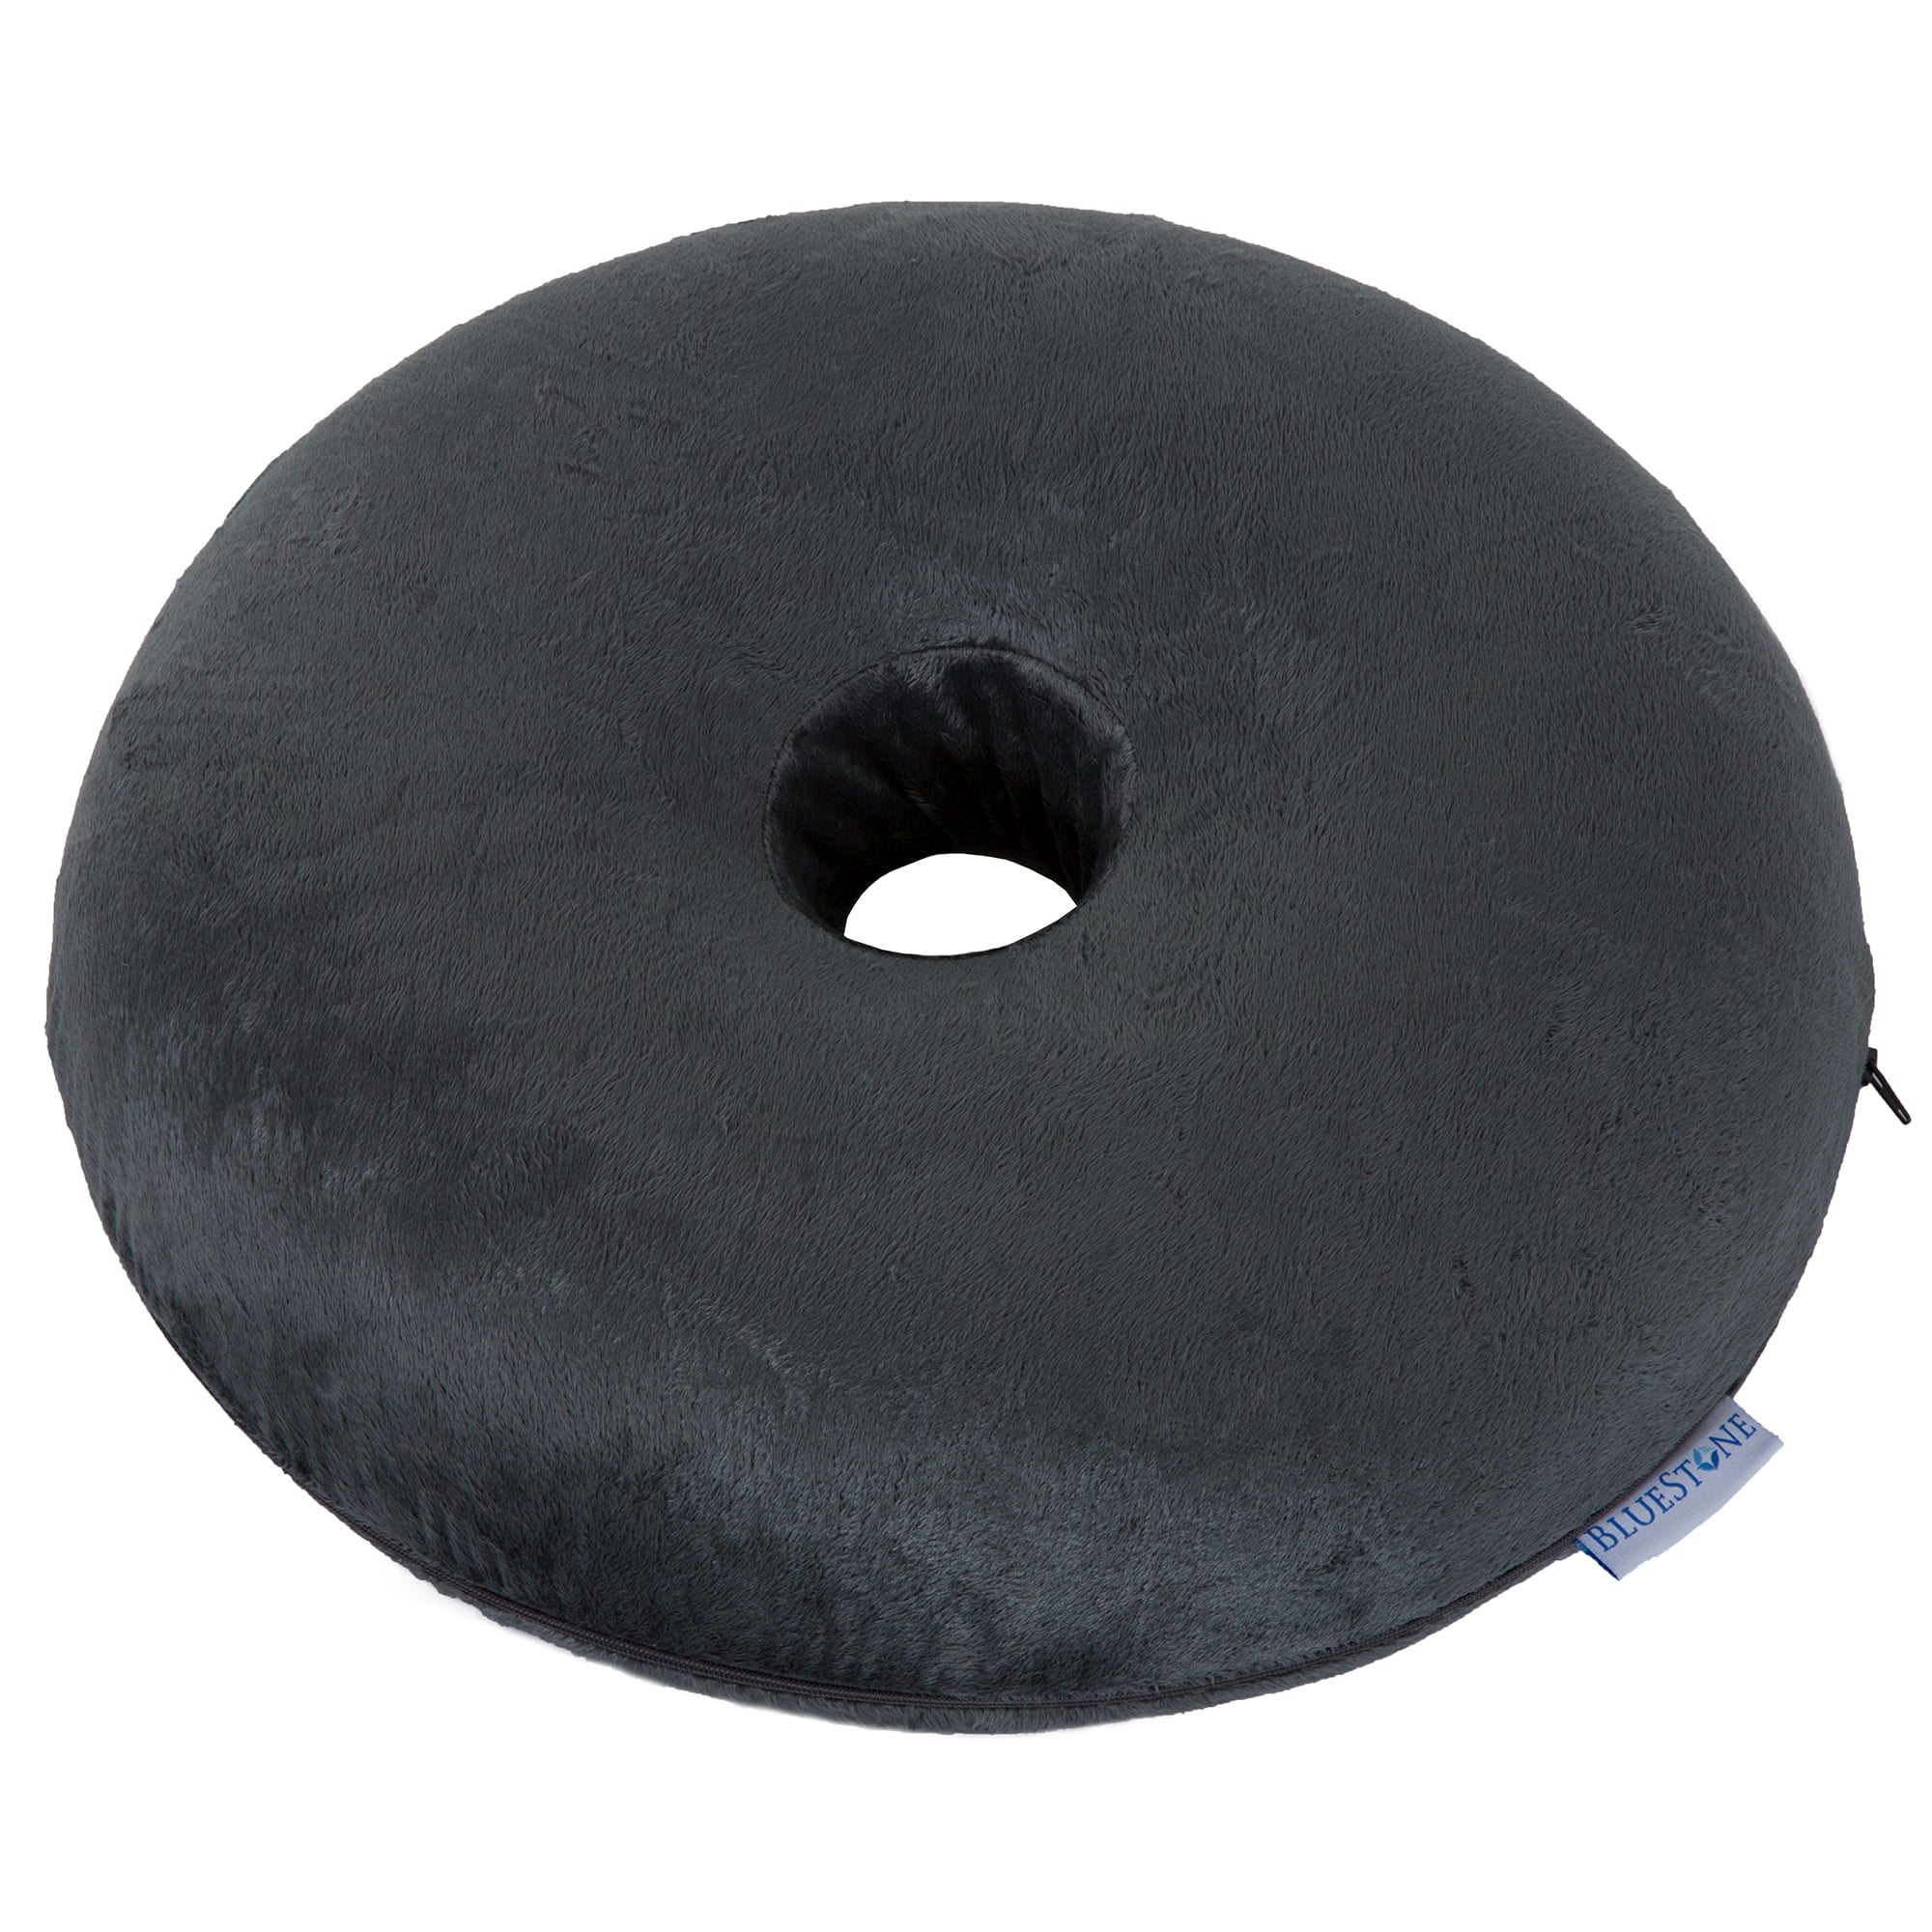 Donut Pillow – Memory Foam Ring Cushion with Plush Zippered Outer Cover for  Orthopedic Pain Relief and Post-Surgery Comfort by Bluestone (Grey) 